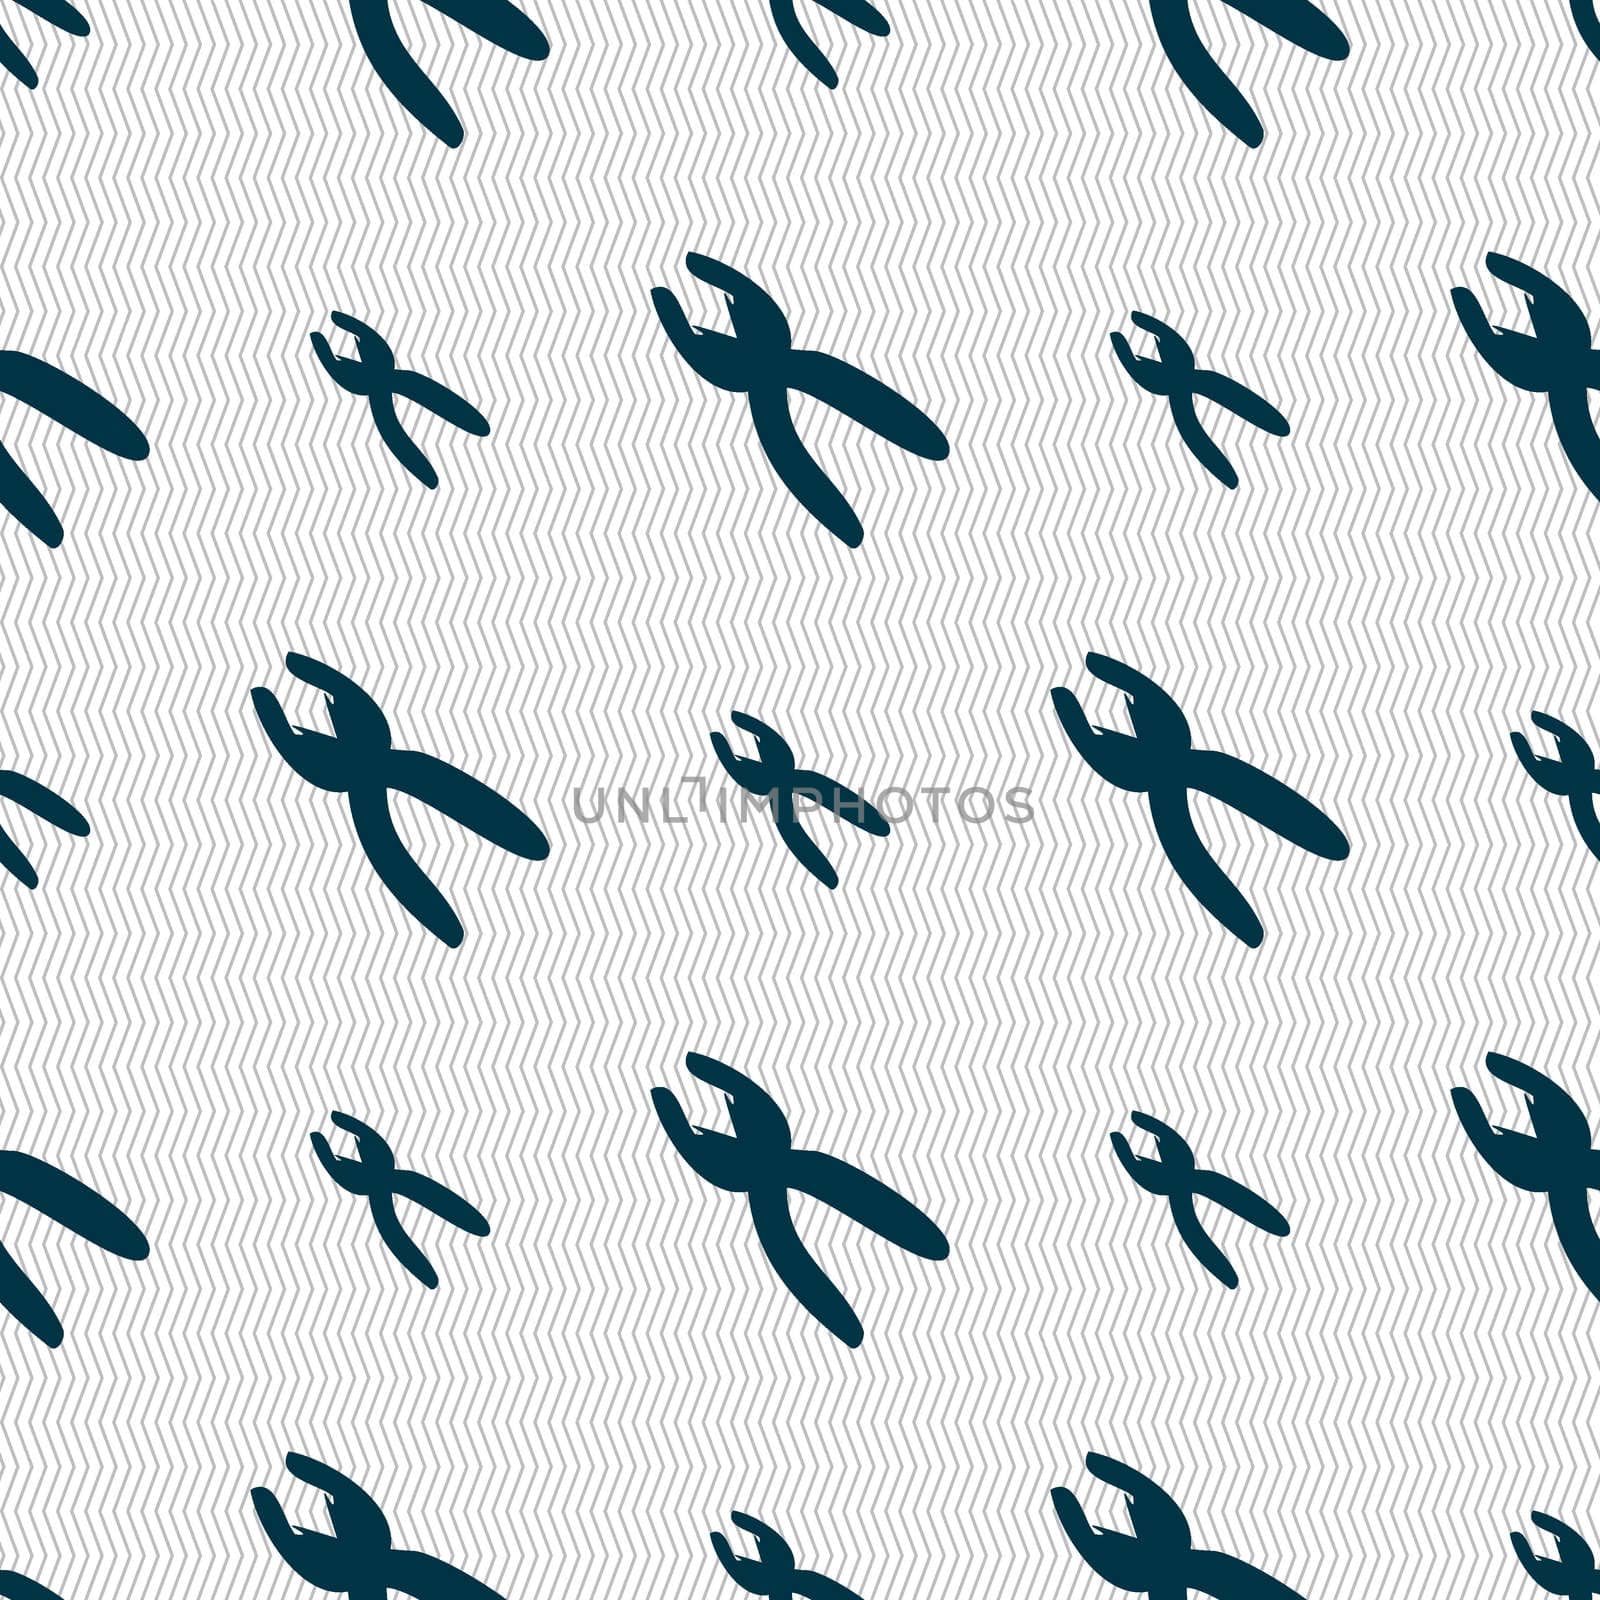 pliers icon sign. Seamless abstract background with geometric shapes.  by serhii_lohvyniuk